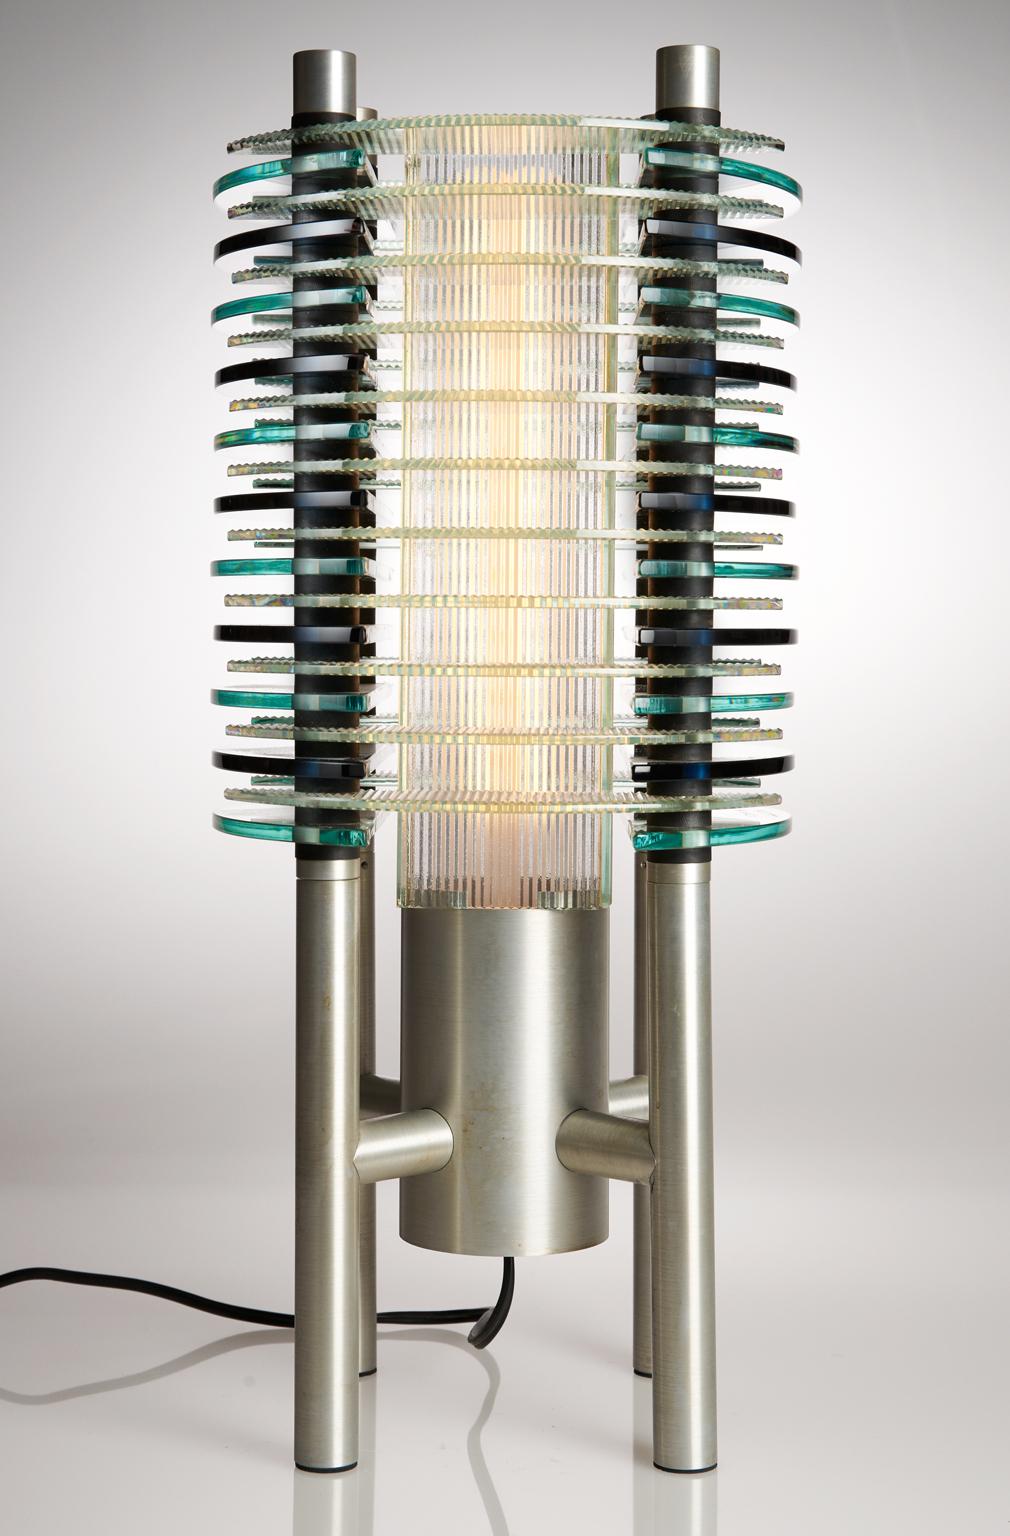 Create a bold statement with this table lamp, titled F-Stop Lamp, designed and created by Sidney Hutter Glass & Light. Originally designed in 1988, this work of art stands the test of time making a bold statement in today's contemporary setting. The